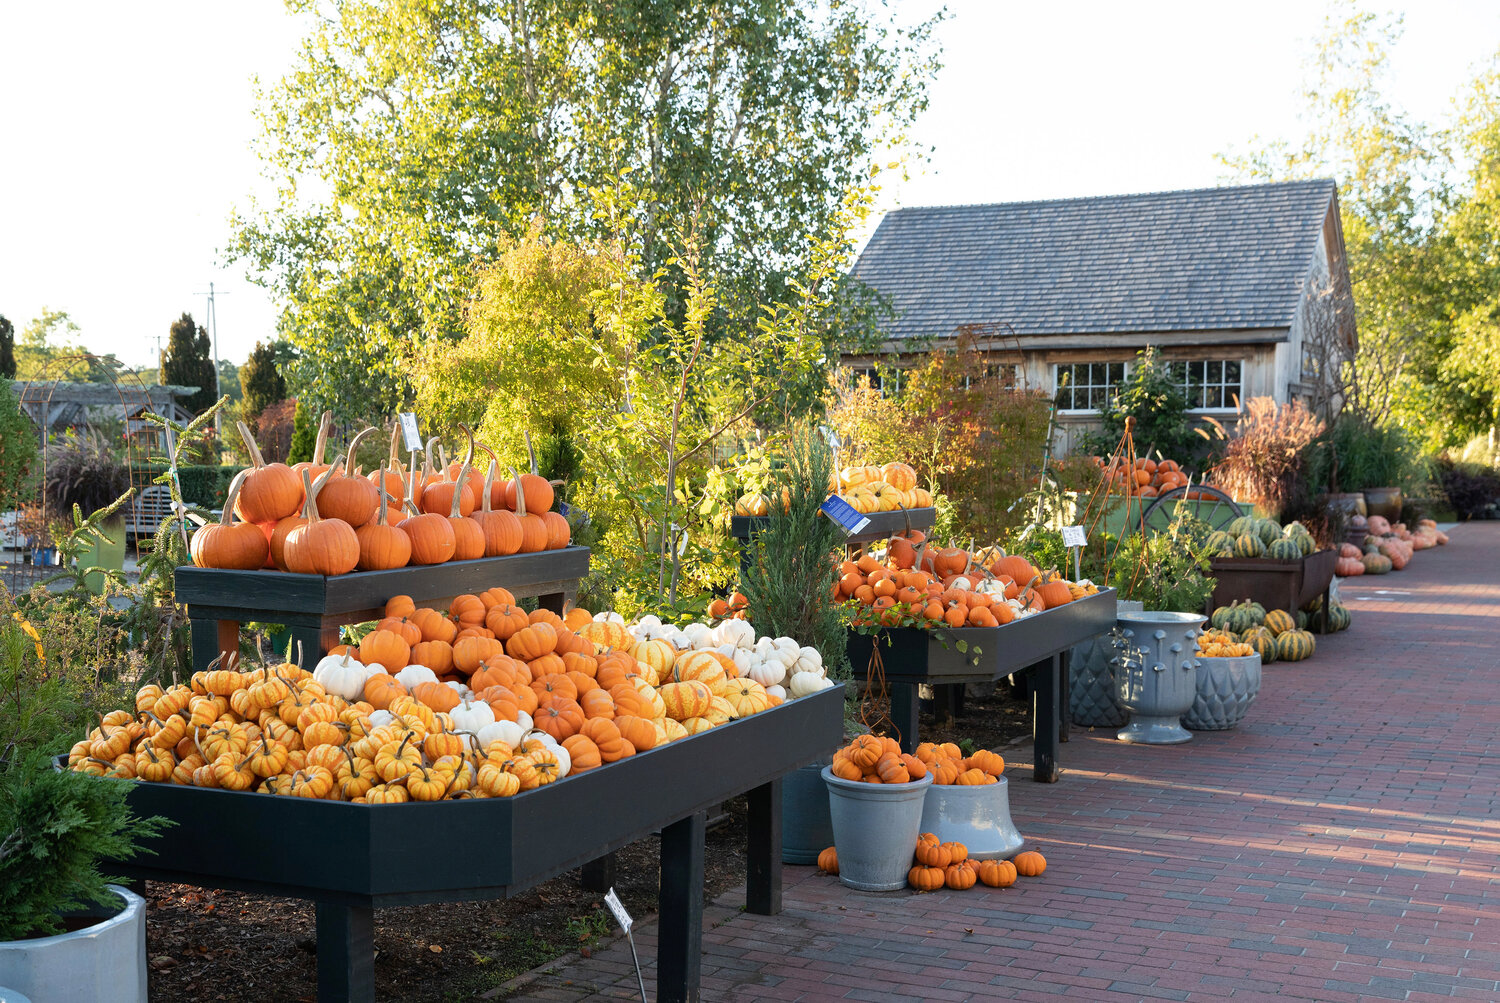 Bountiful displays at The Farmer’s Daughter, South Kingstown